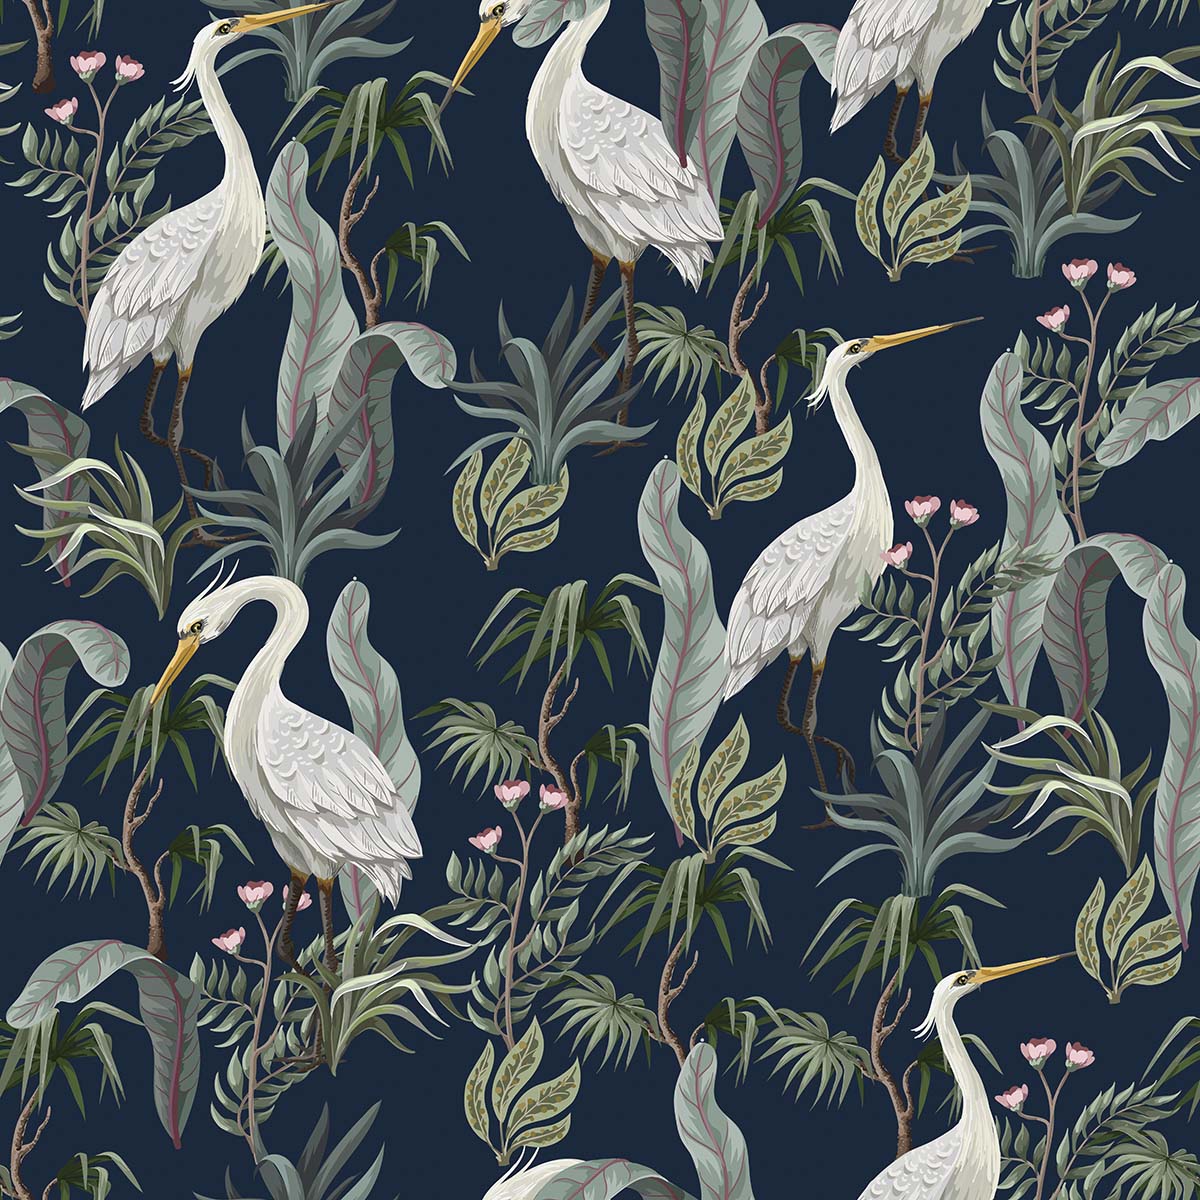 A pattern of white birds and plants